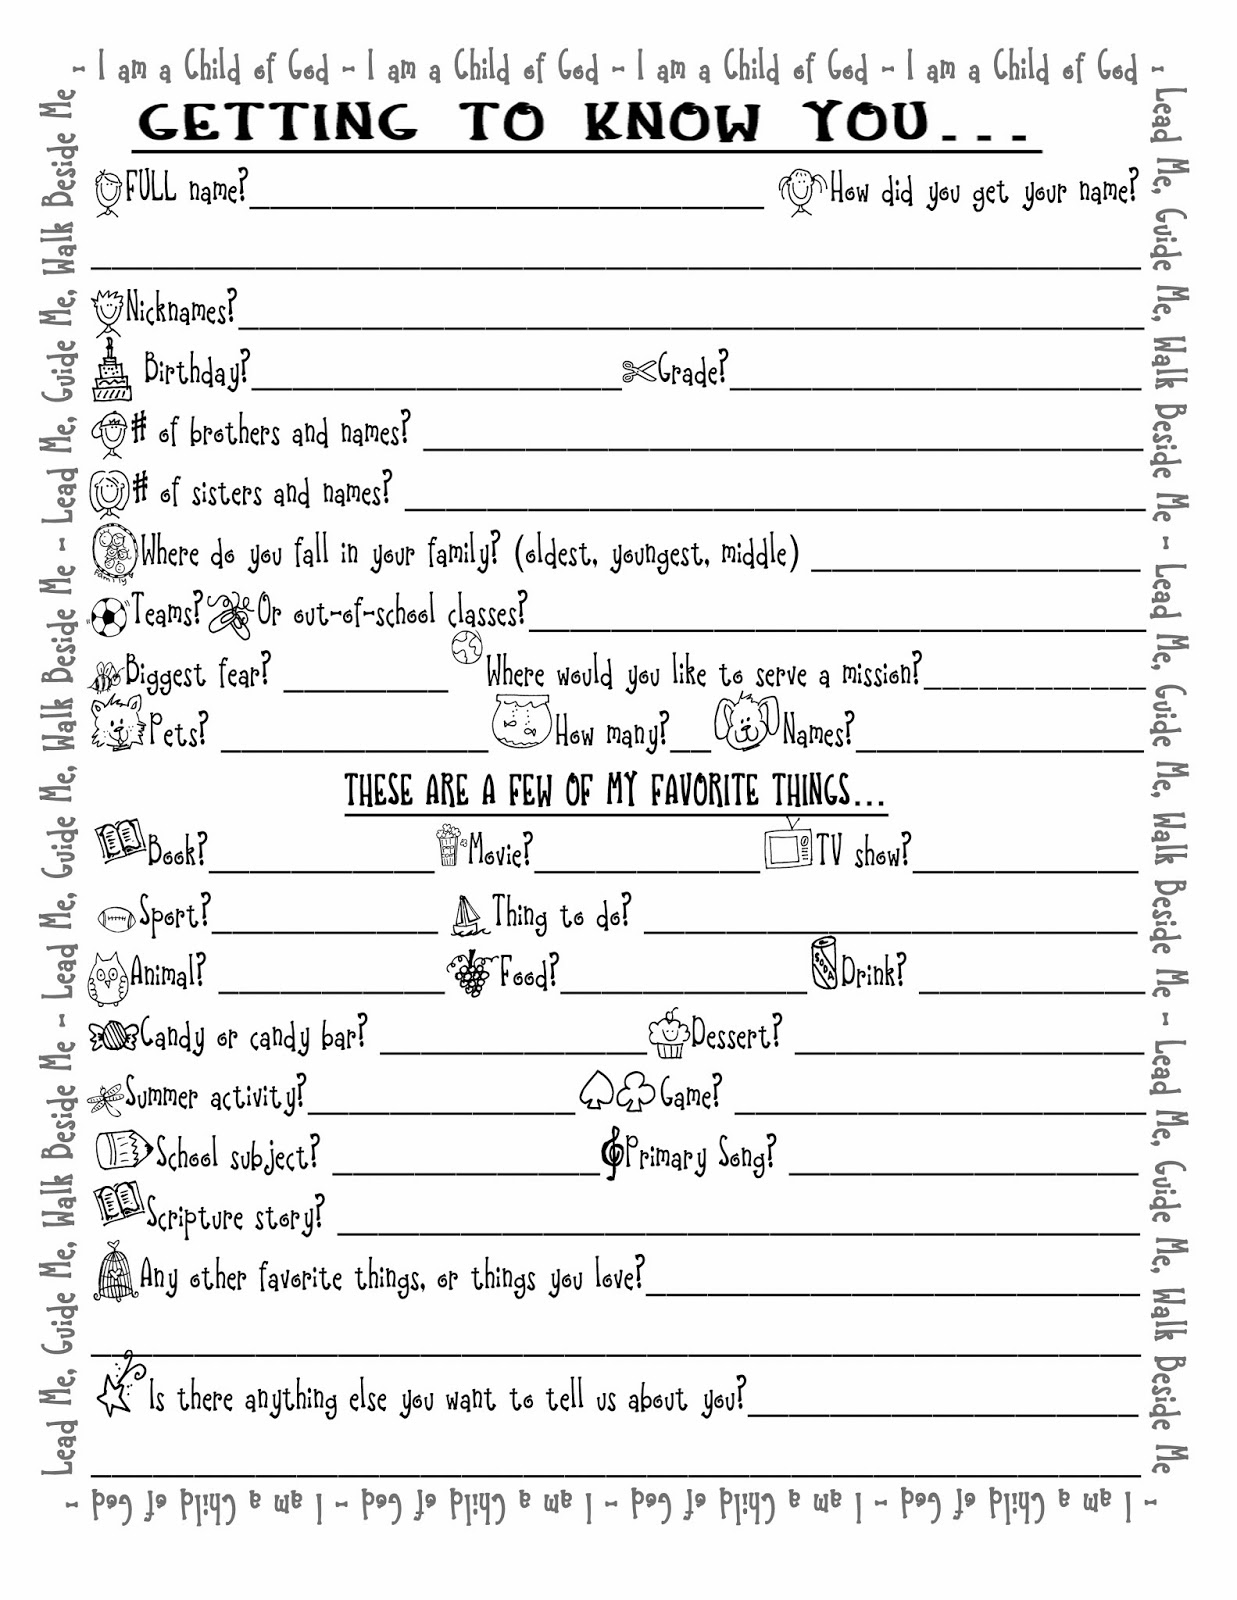 get-to-know-you-worksheet-free-printable